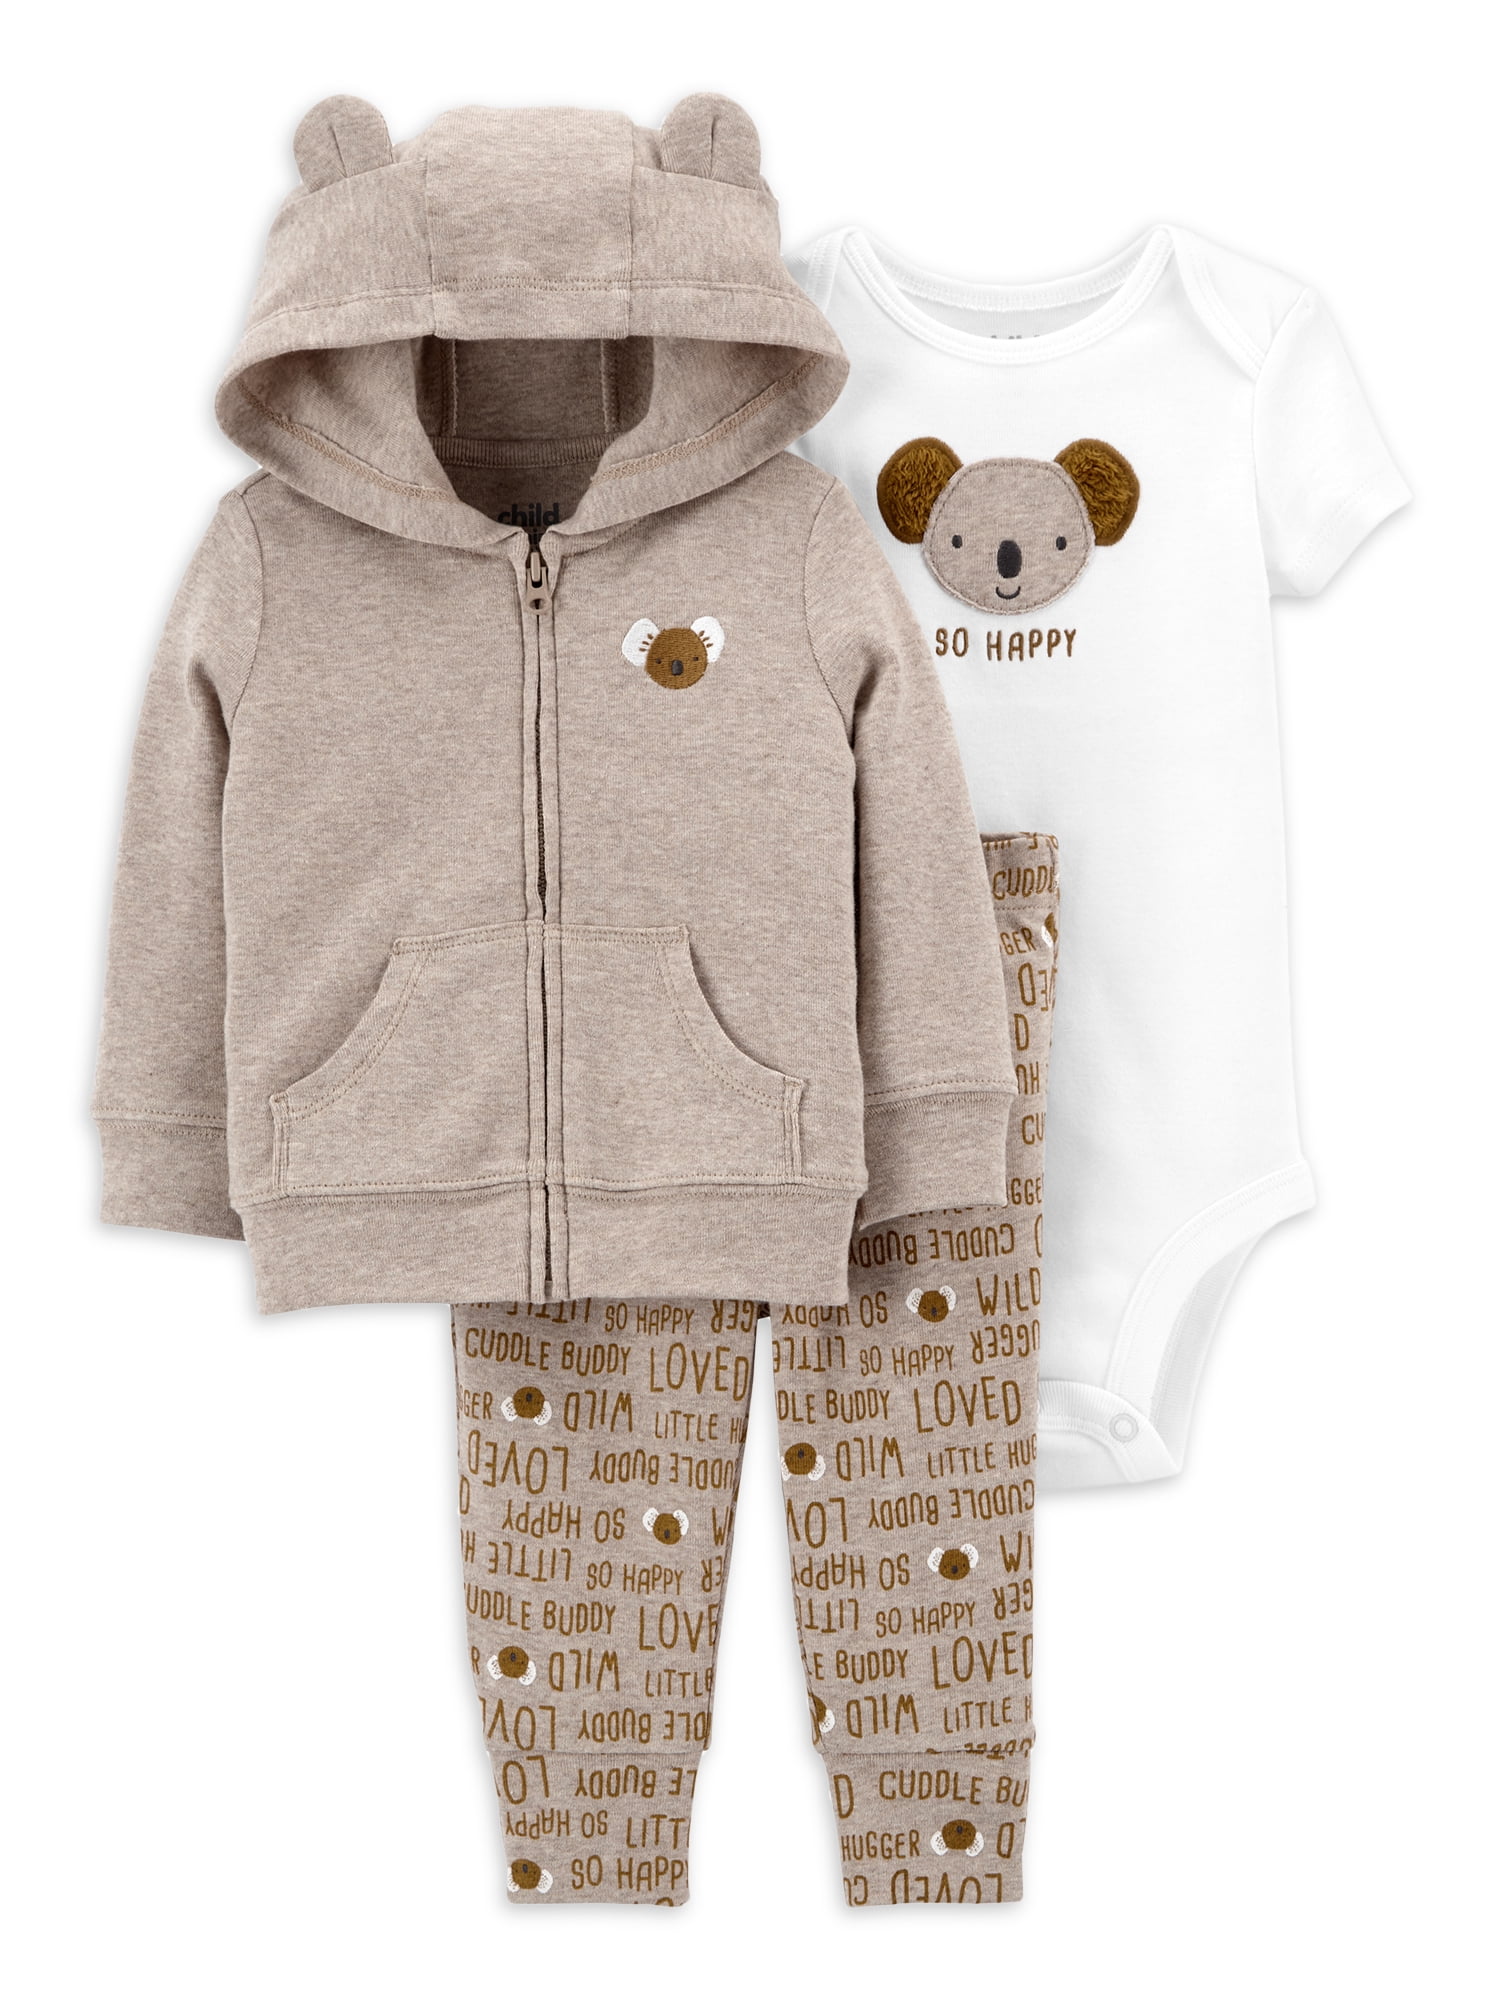 Carter's Child of Mine Baby Boy Outfit Jacket, Short Sleeve Bodysuit &  Pants, 3-Piece, Preemie-24 Months